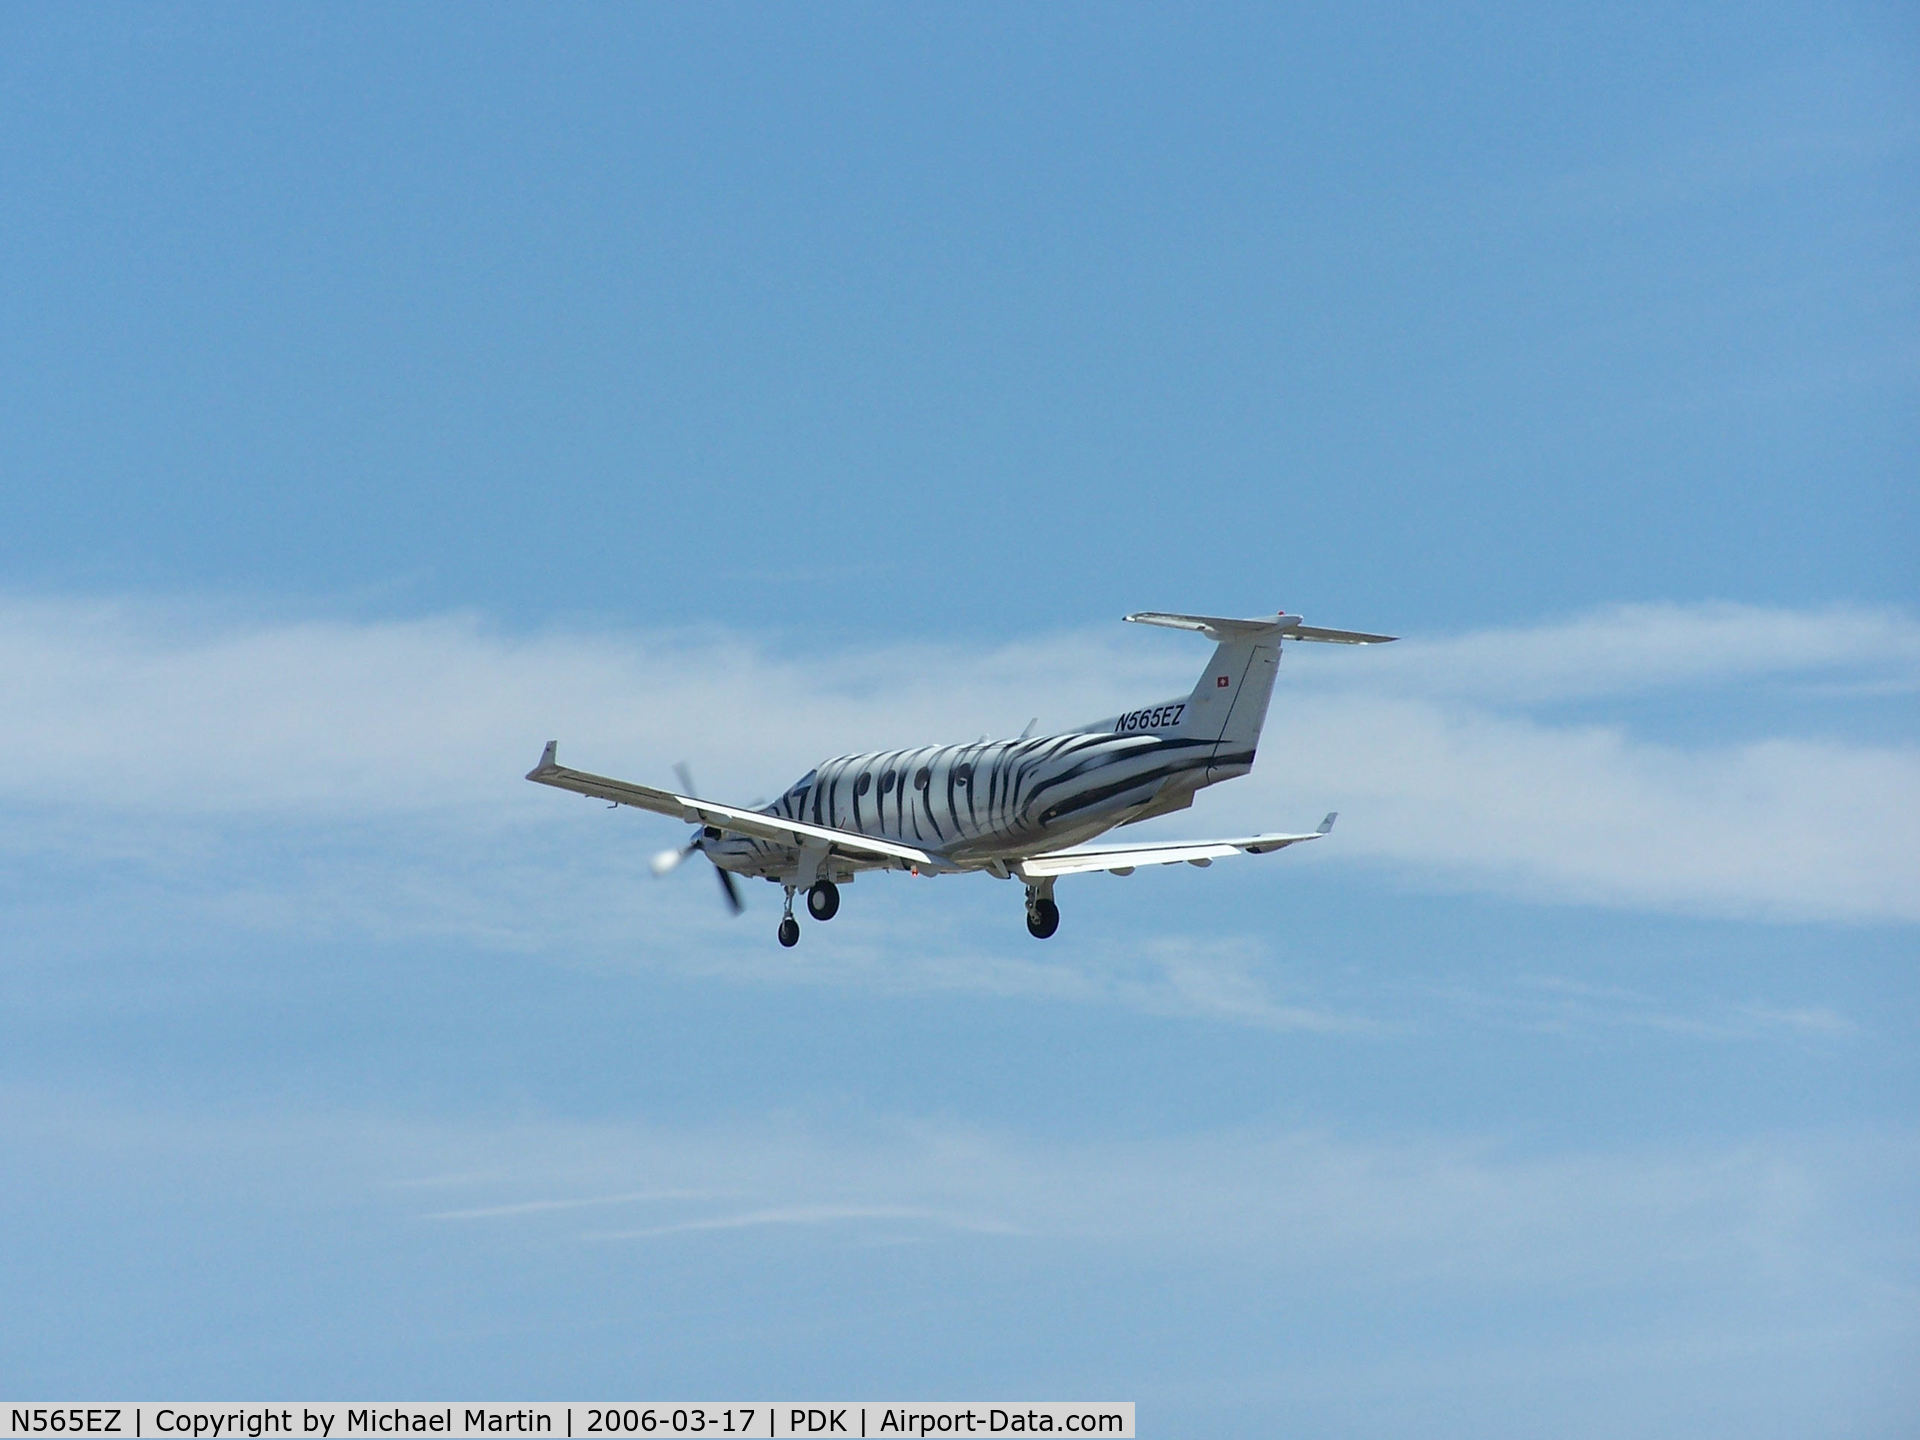 N565EZ, 1999 Pilatus PC-12/45 C/N 290, Departing PDK enroute to SSI for a new owner!